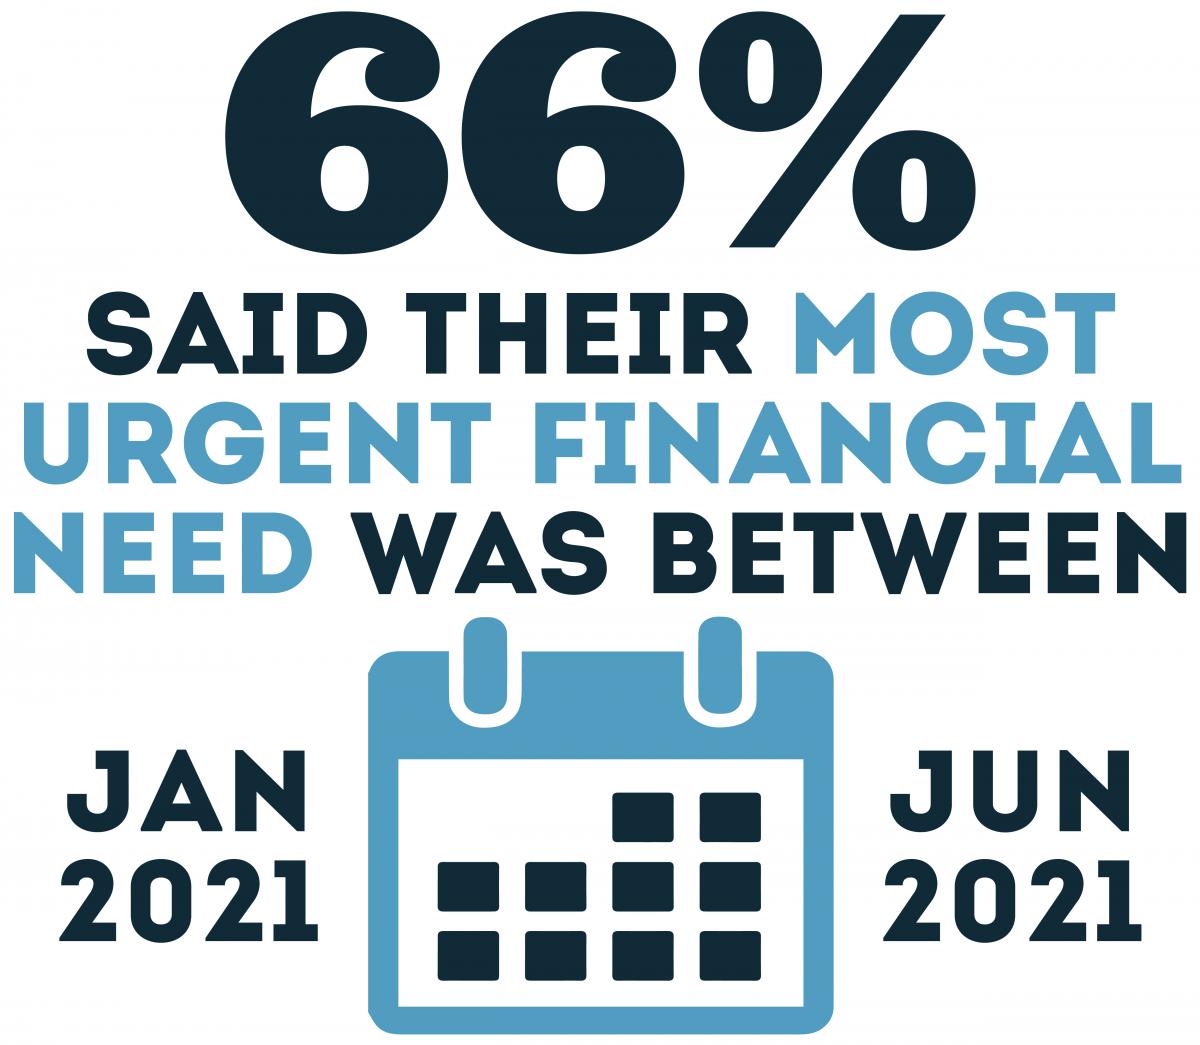 66% said their most urgent financial need was between january and june 2021.jpg